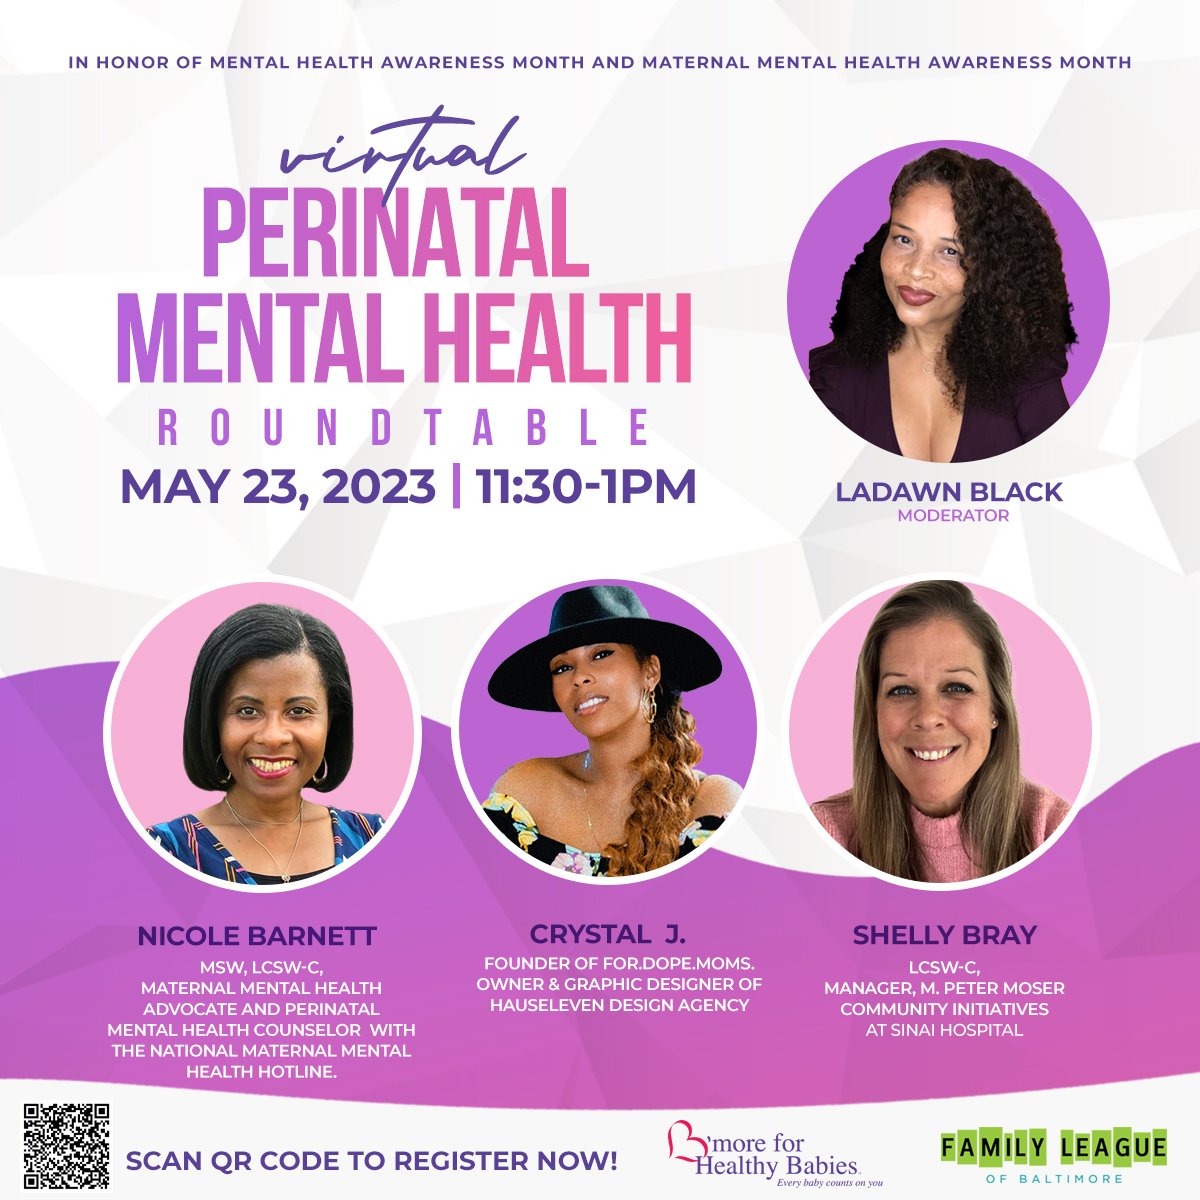 Did you miss our Perinatal Mental Health Virtual Roundtable? Don't fret ... you can access the recording at youtu.be/eo4RDkkudVg. 
#maternalmentalhealth #perinatalmentalhealth #mentalhealthawareness #infants #babies #bmoreforheathybabies @bmore4healthybabies #postpartum